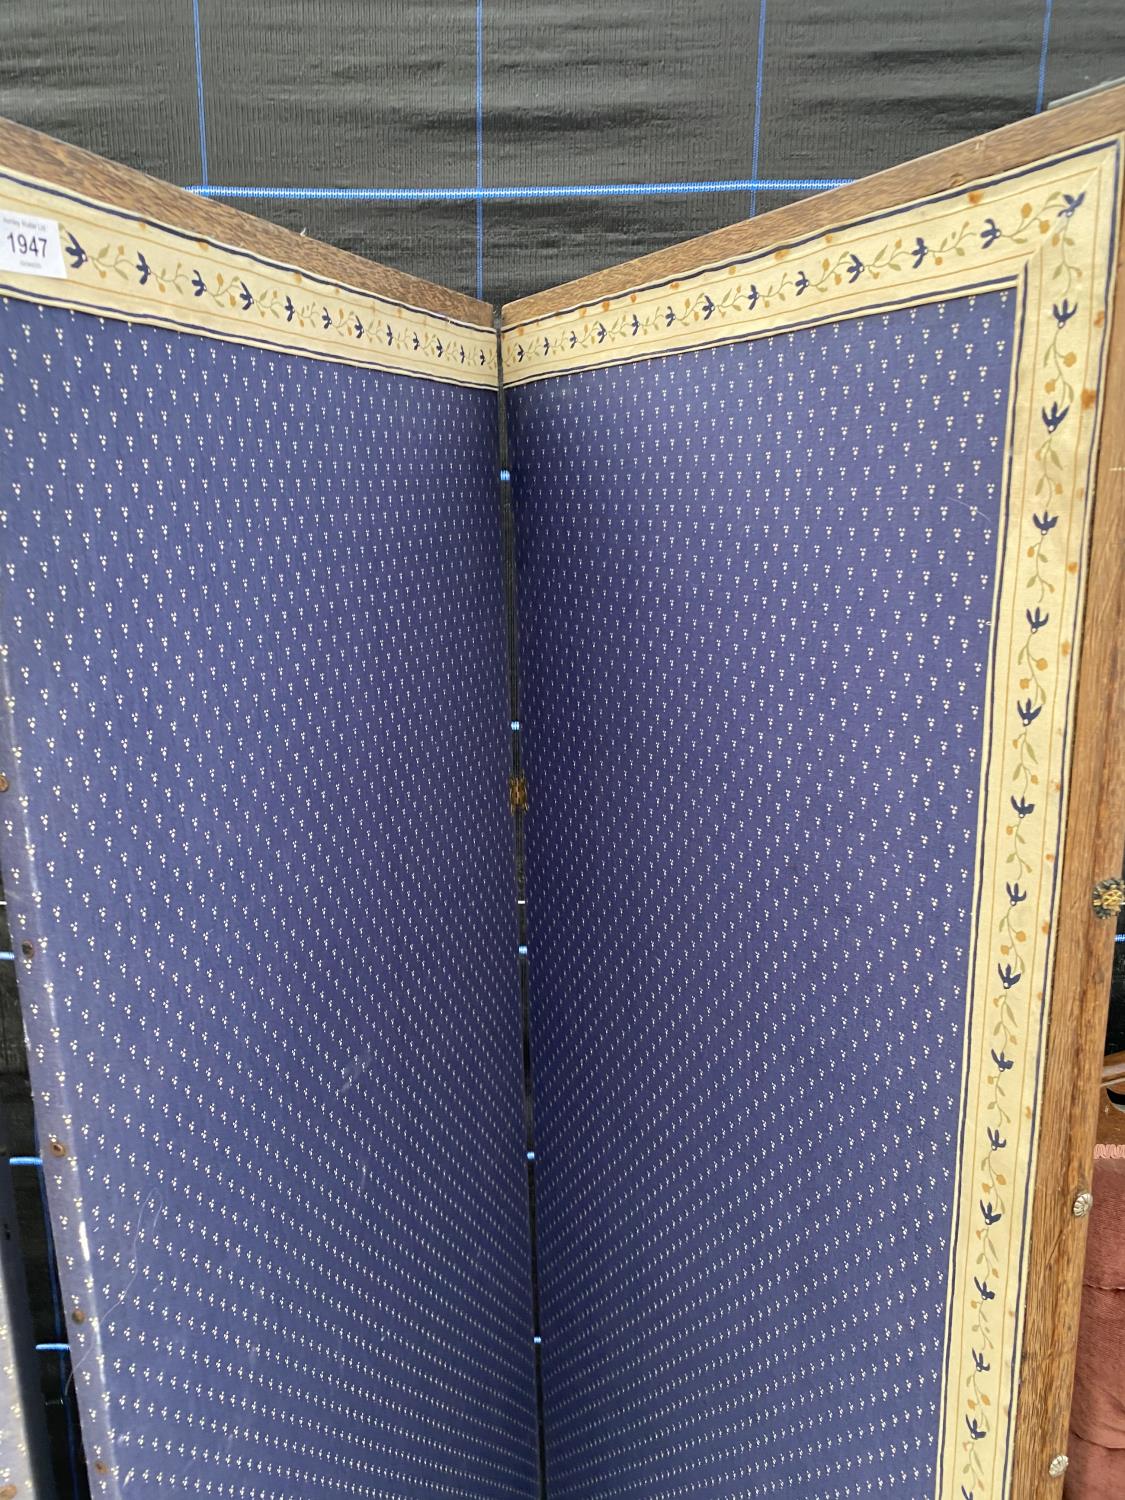 A FOUR SECTION FOLDING SCREEN - Image 2 of 4